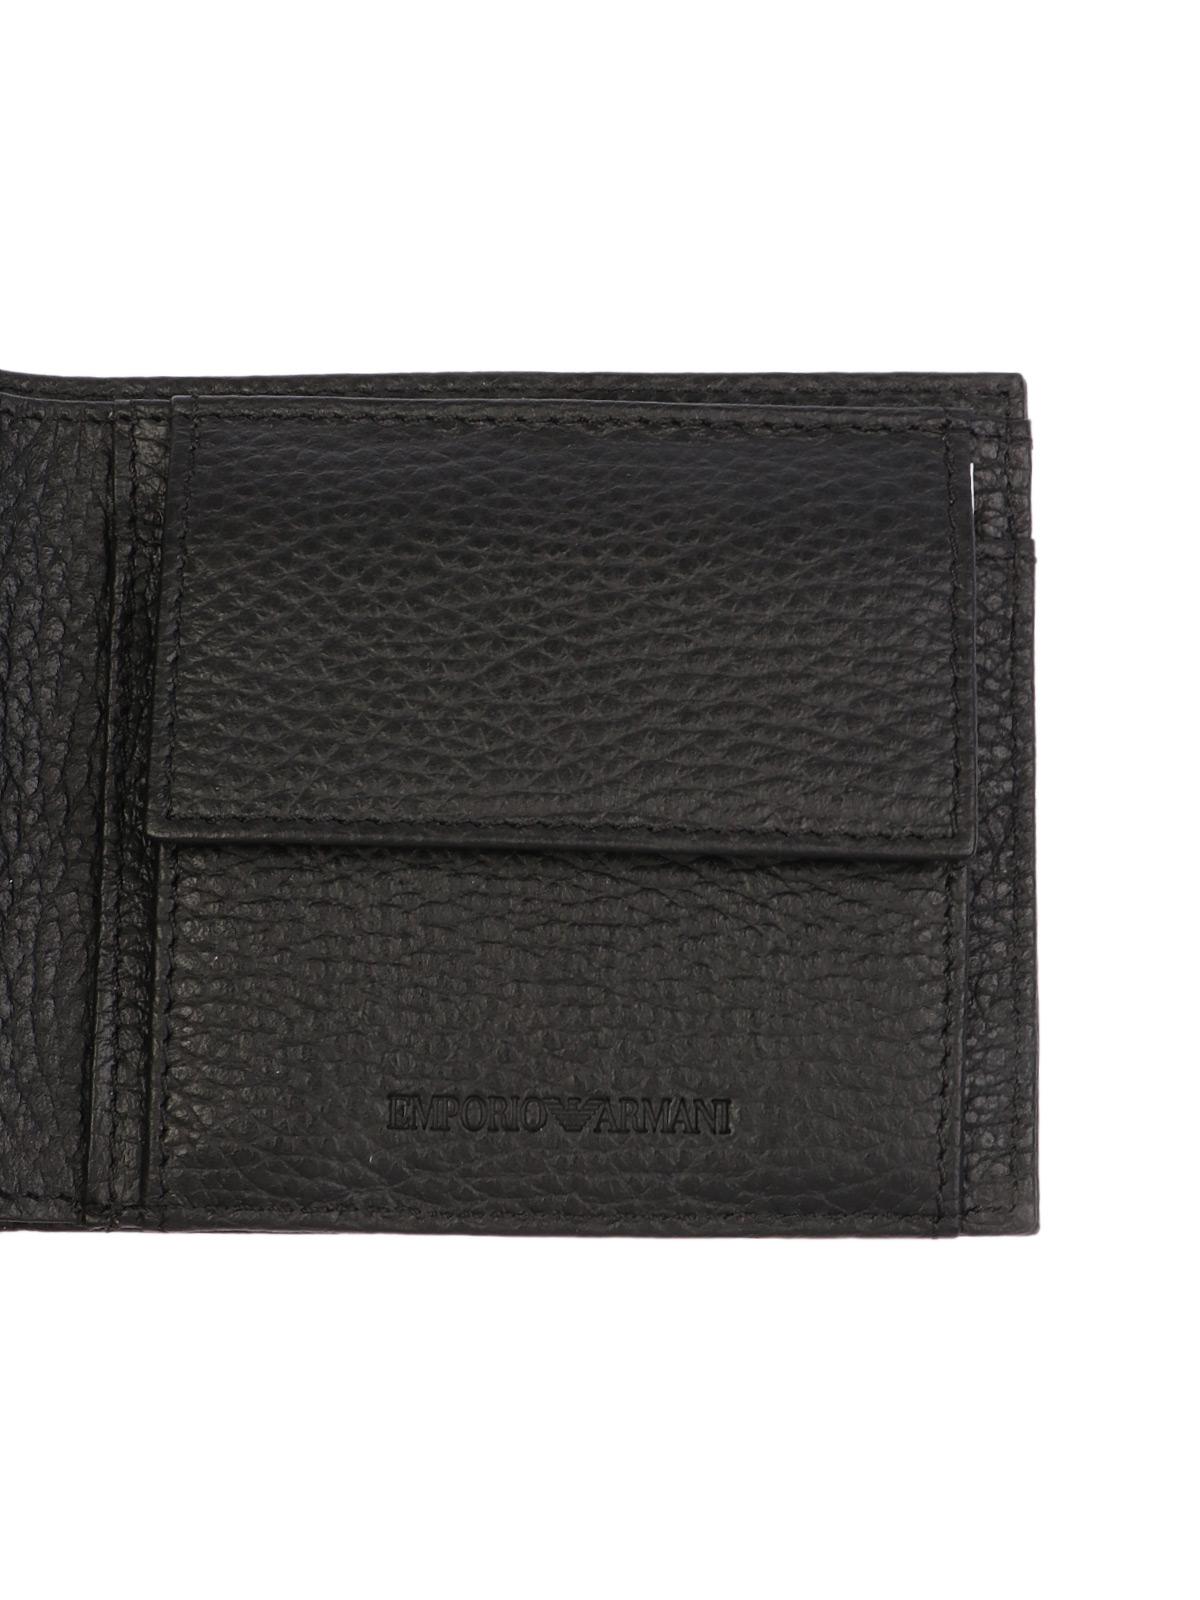 Picture of EMPORIO ARMANI | Men's Tumbled Leather Wallet